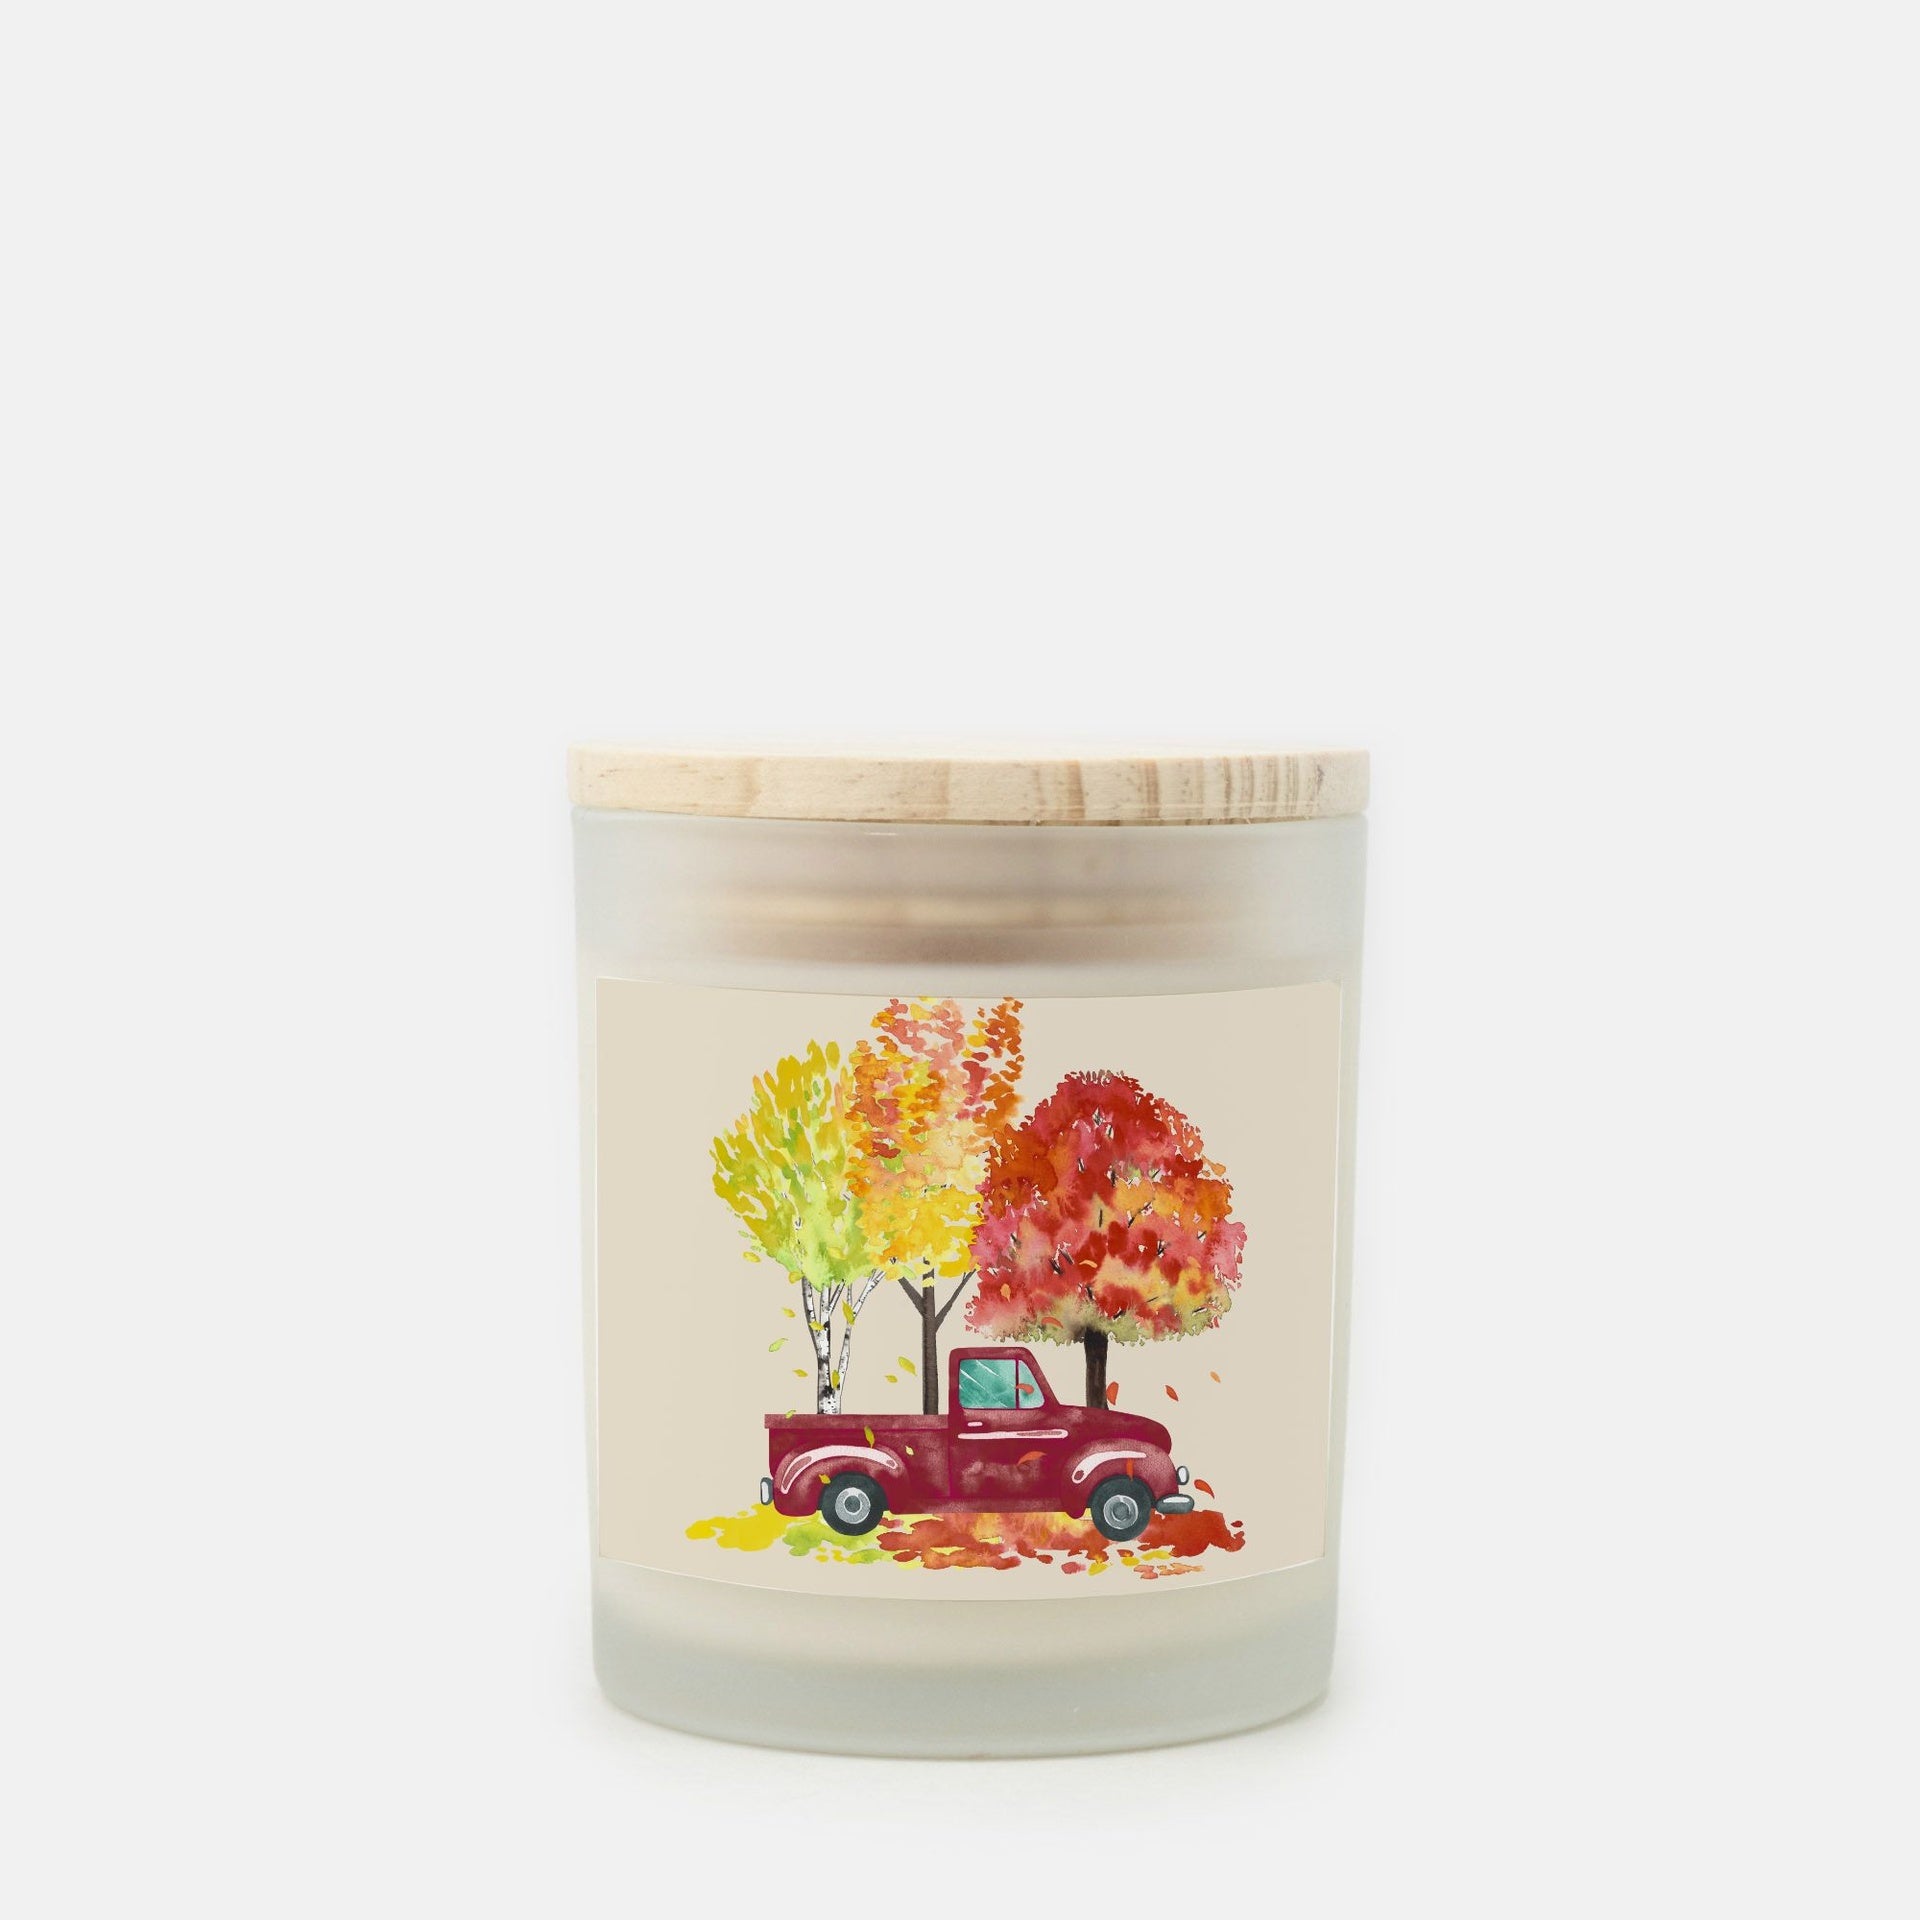 Lifestyle Details - 11oz Burgundy Rustic Truck & Leaves Frosted Glass Candle - Cashmere Vanilla